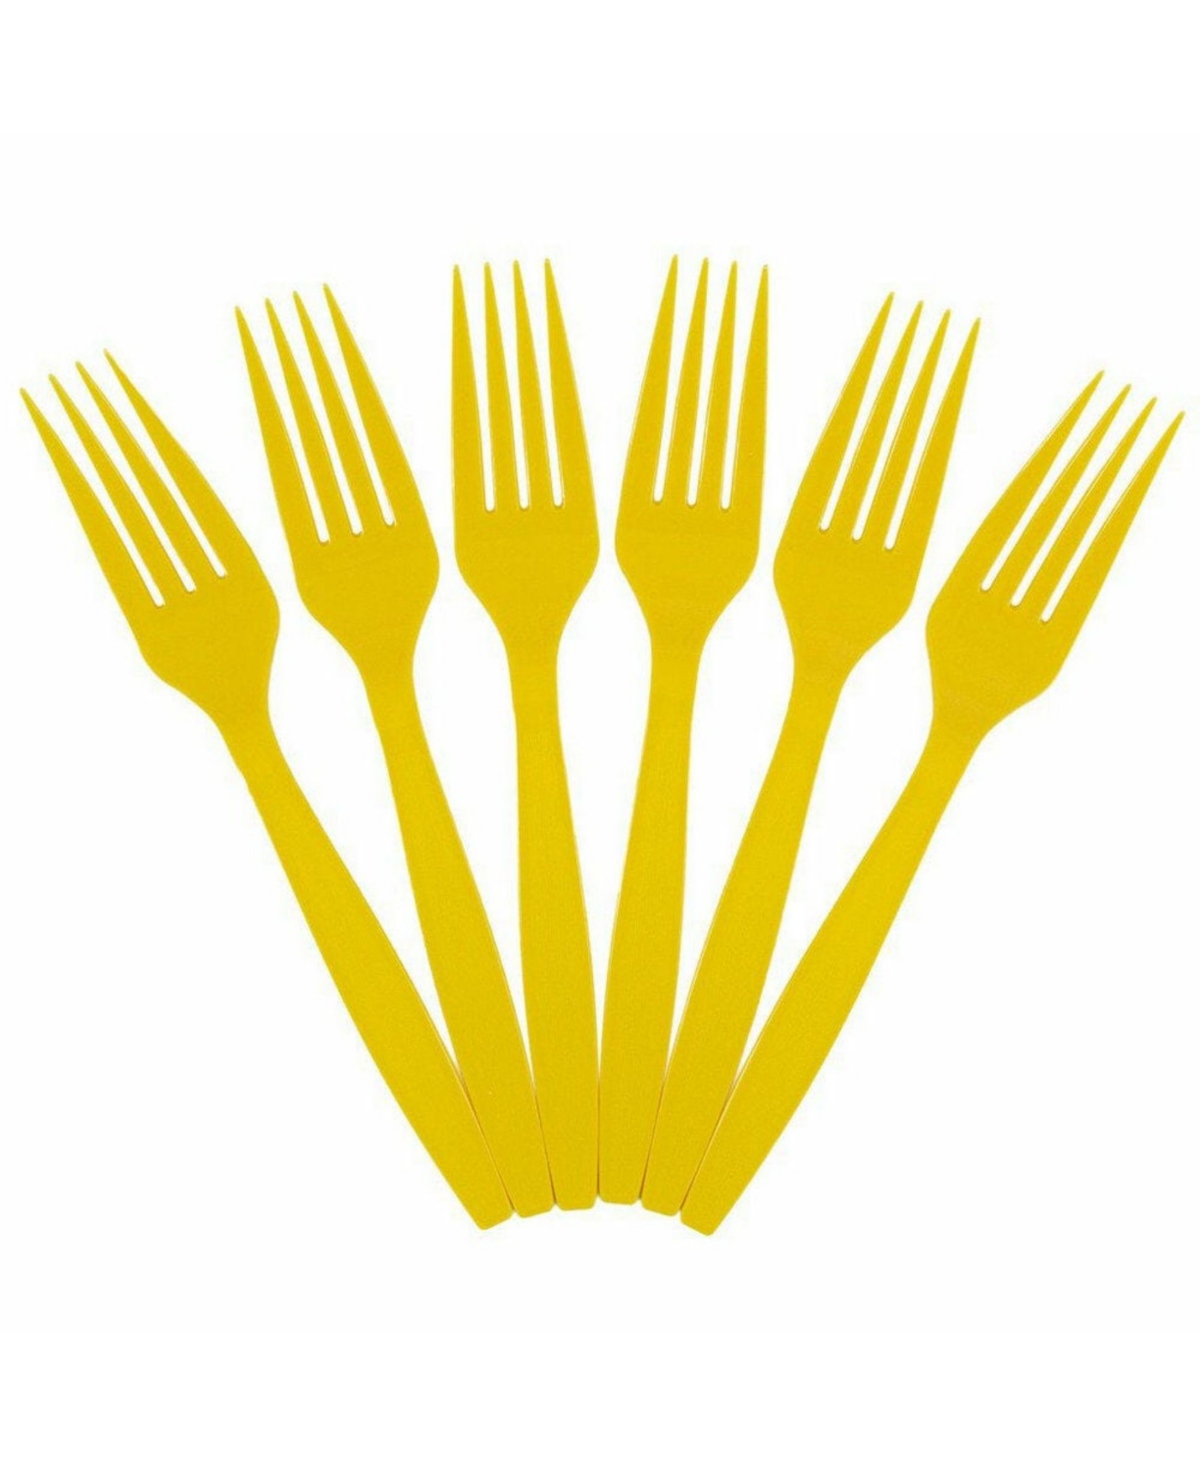 Big Party Pack of Premium Plastic Forks - 100 Disposable Forks Per Box - Yellow